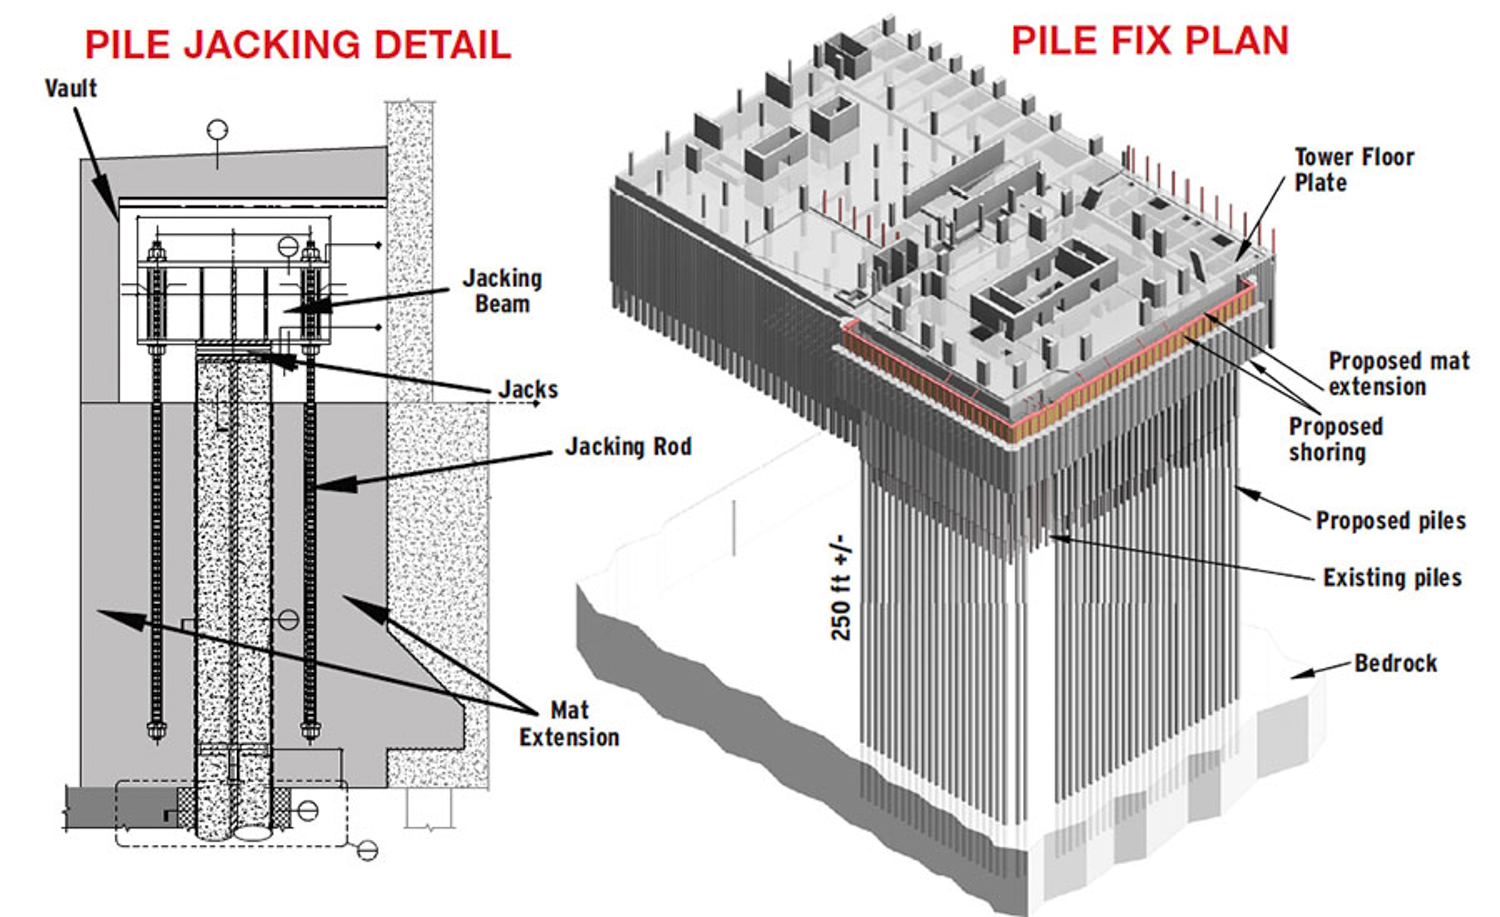 Engineering solution for the tilting Millennium Tower, image by SGH courtesy Engineering News